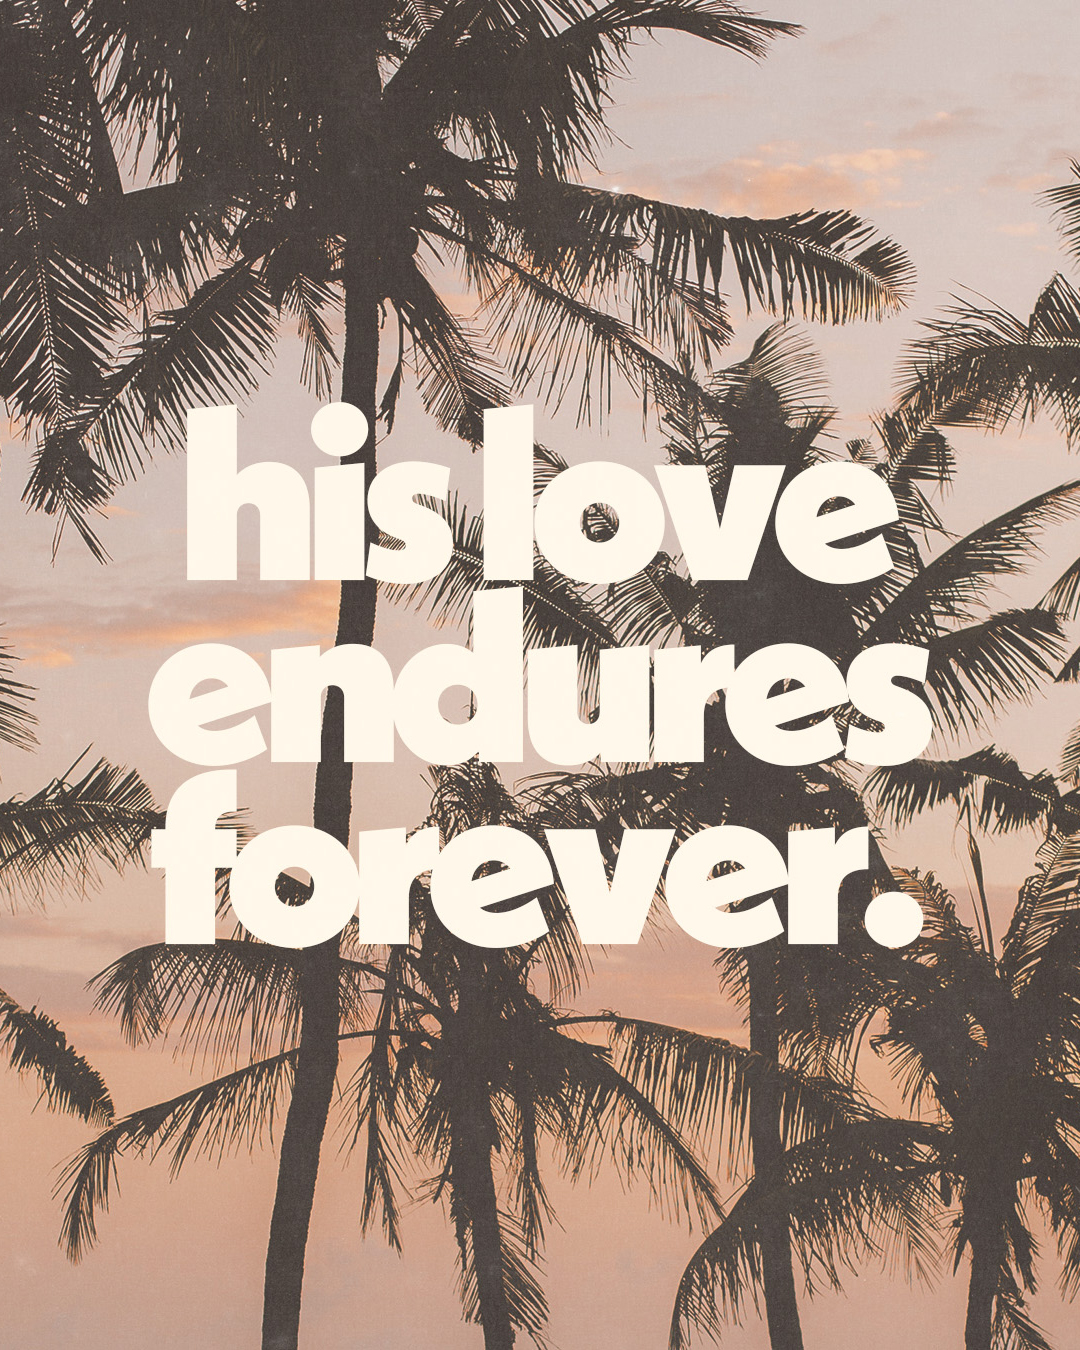 His love endures forever.